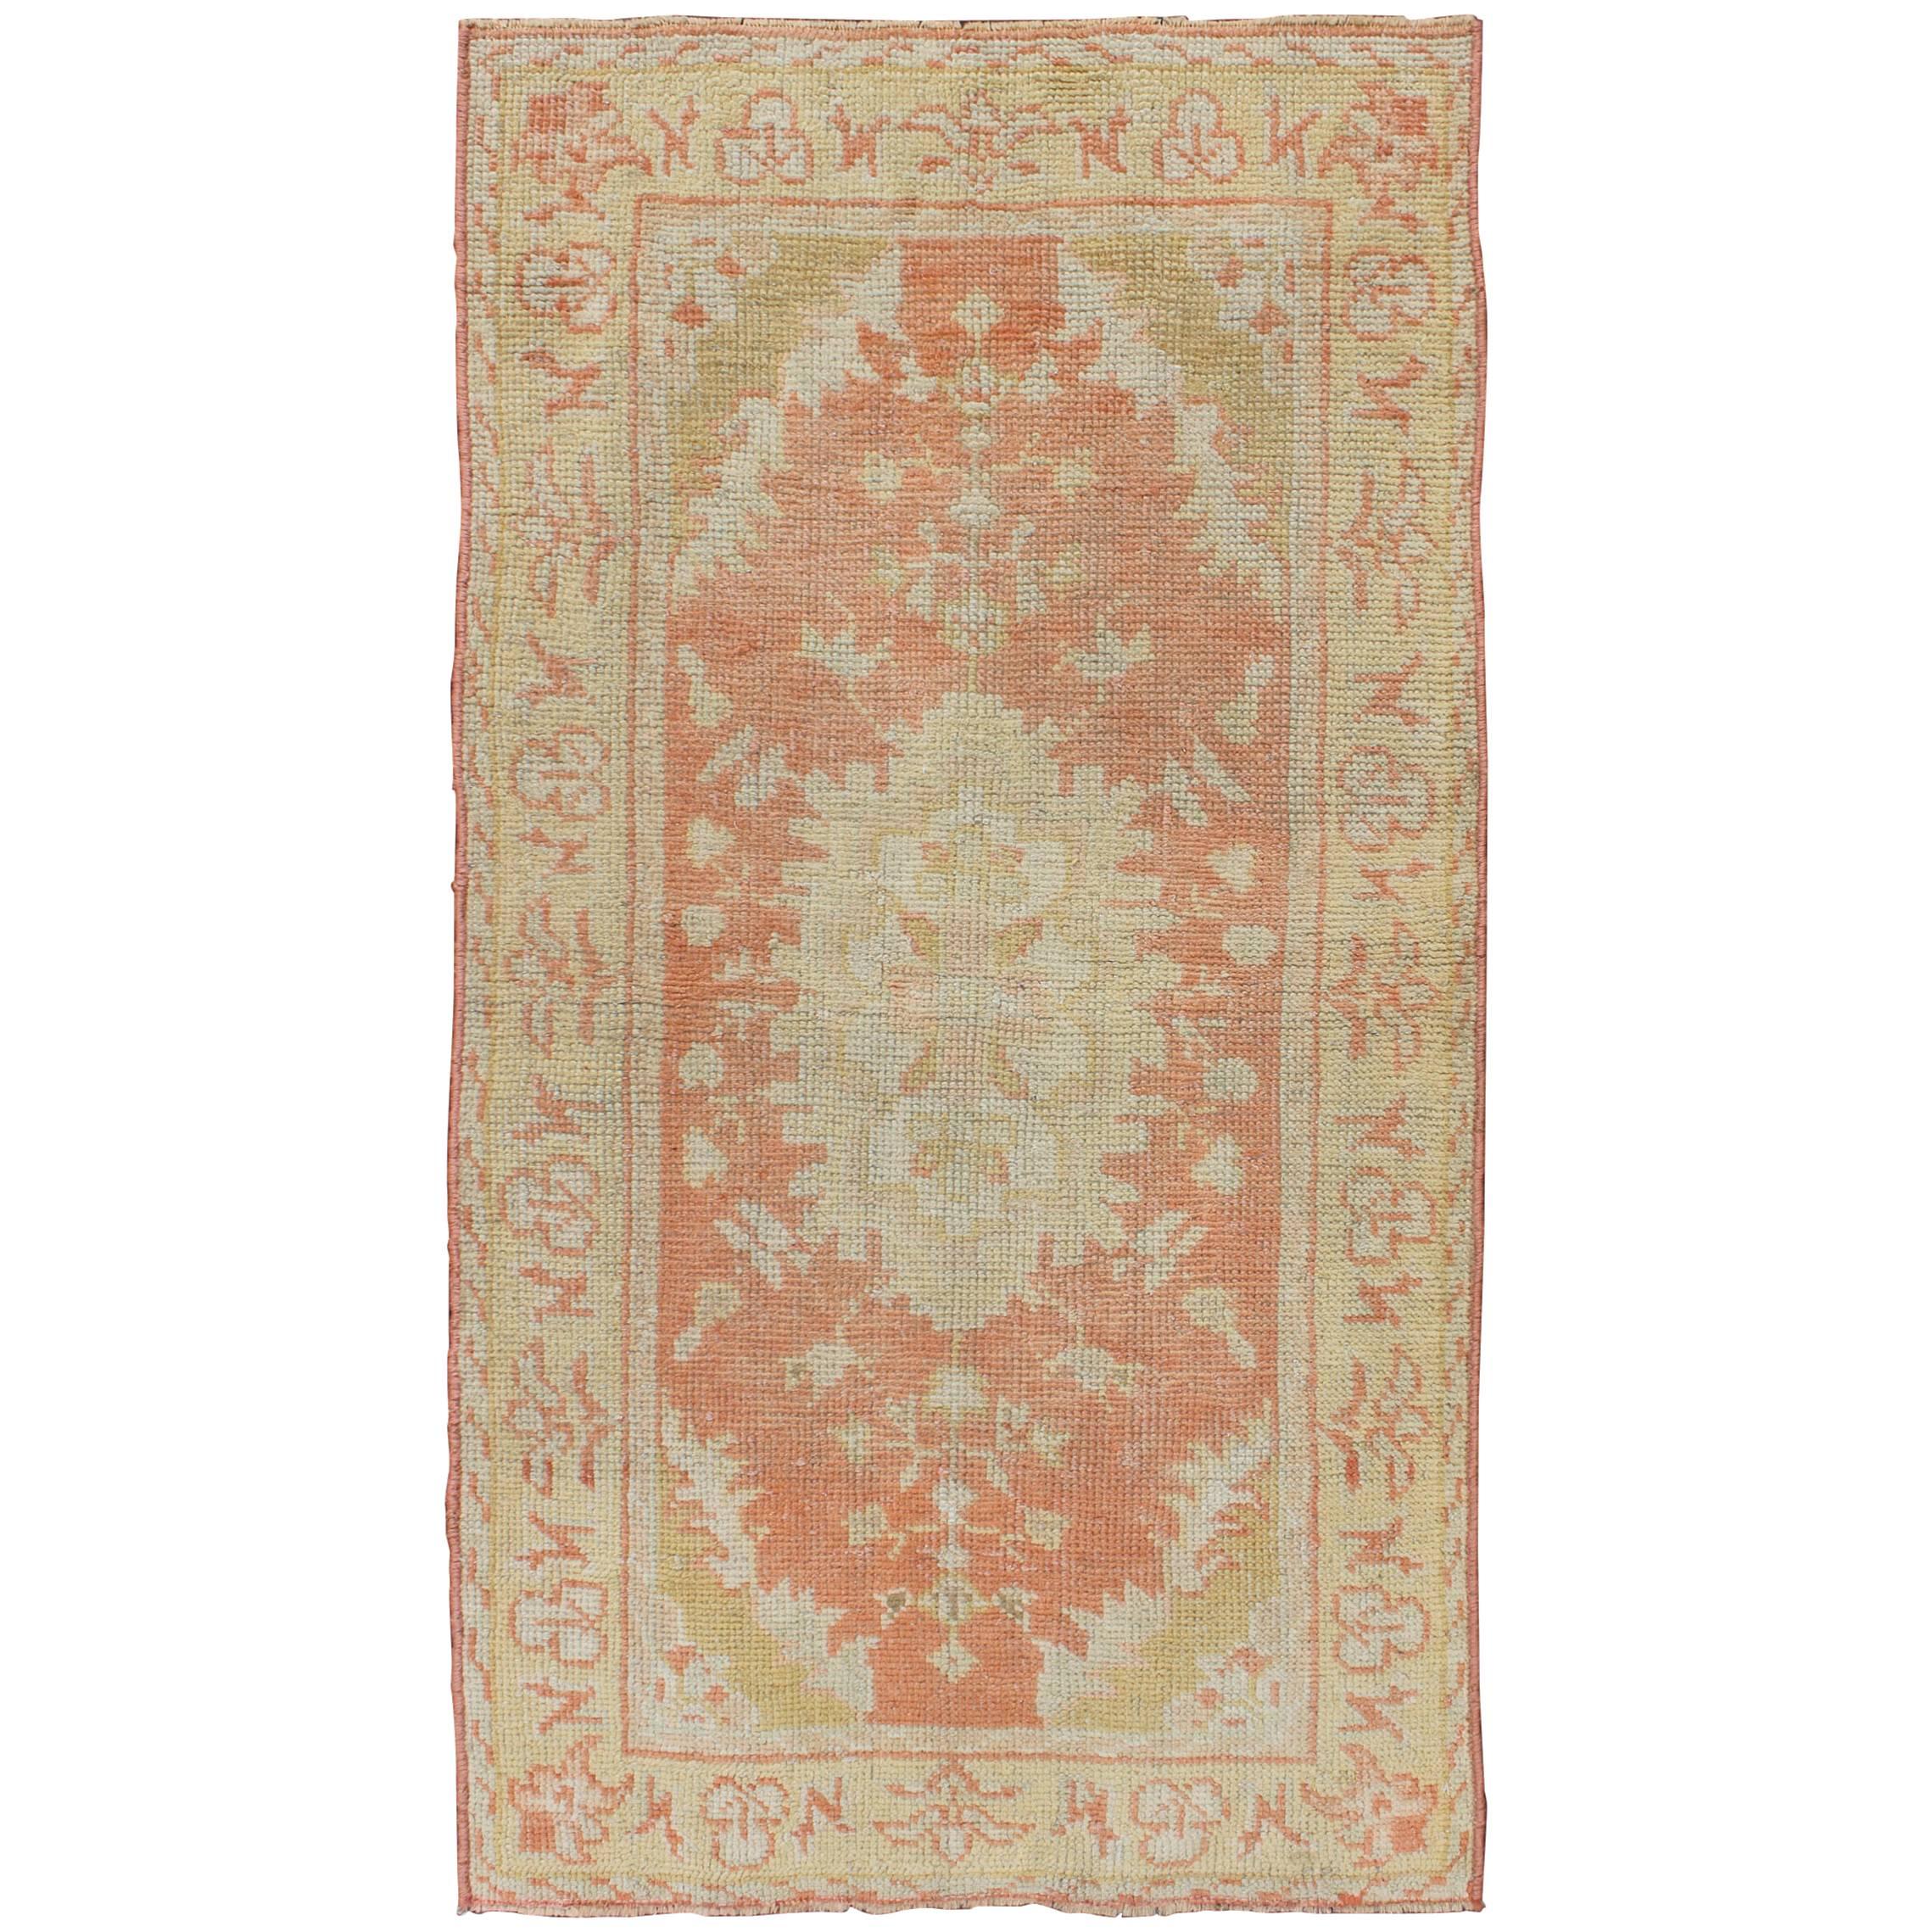 Antique Turkish Oushak Rug with Floral Motifs and Coral Background